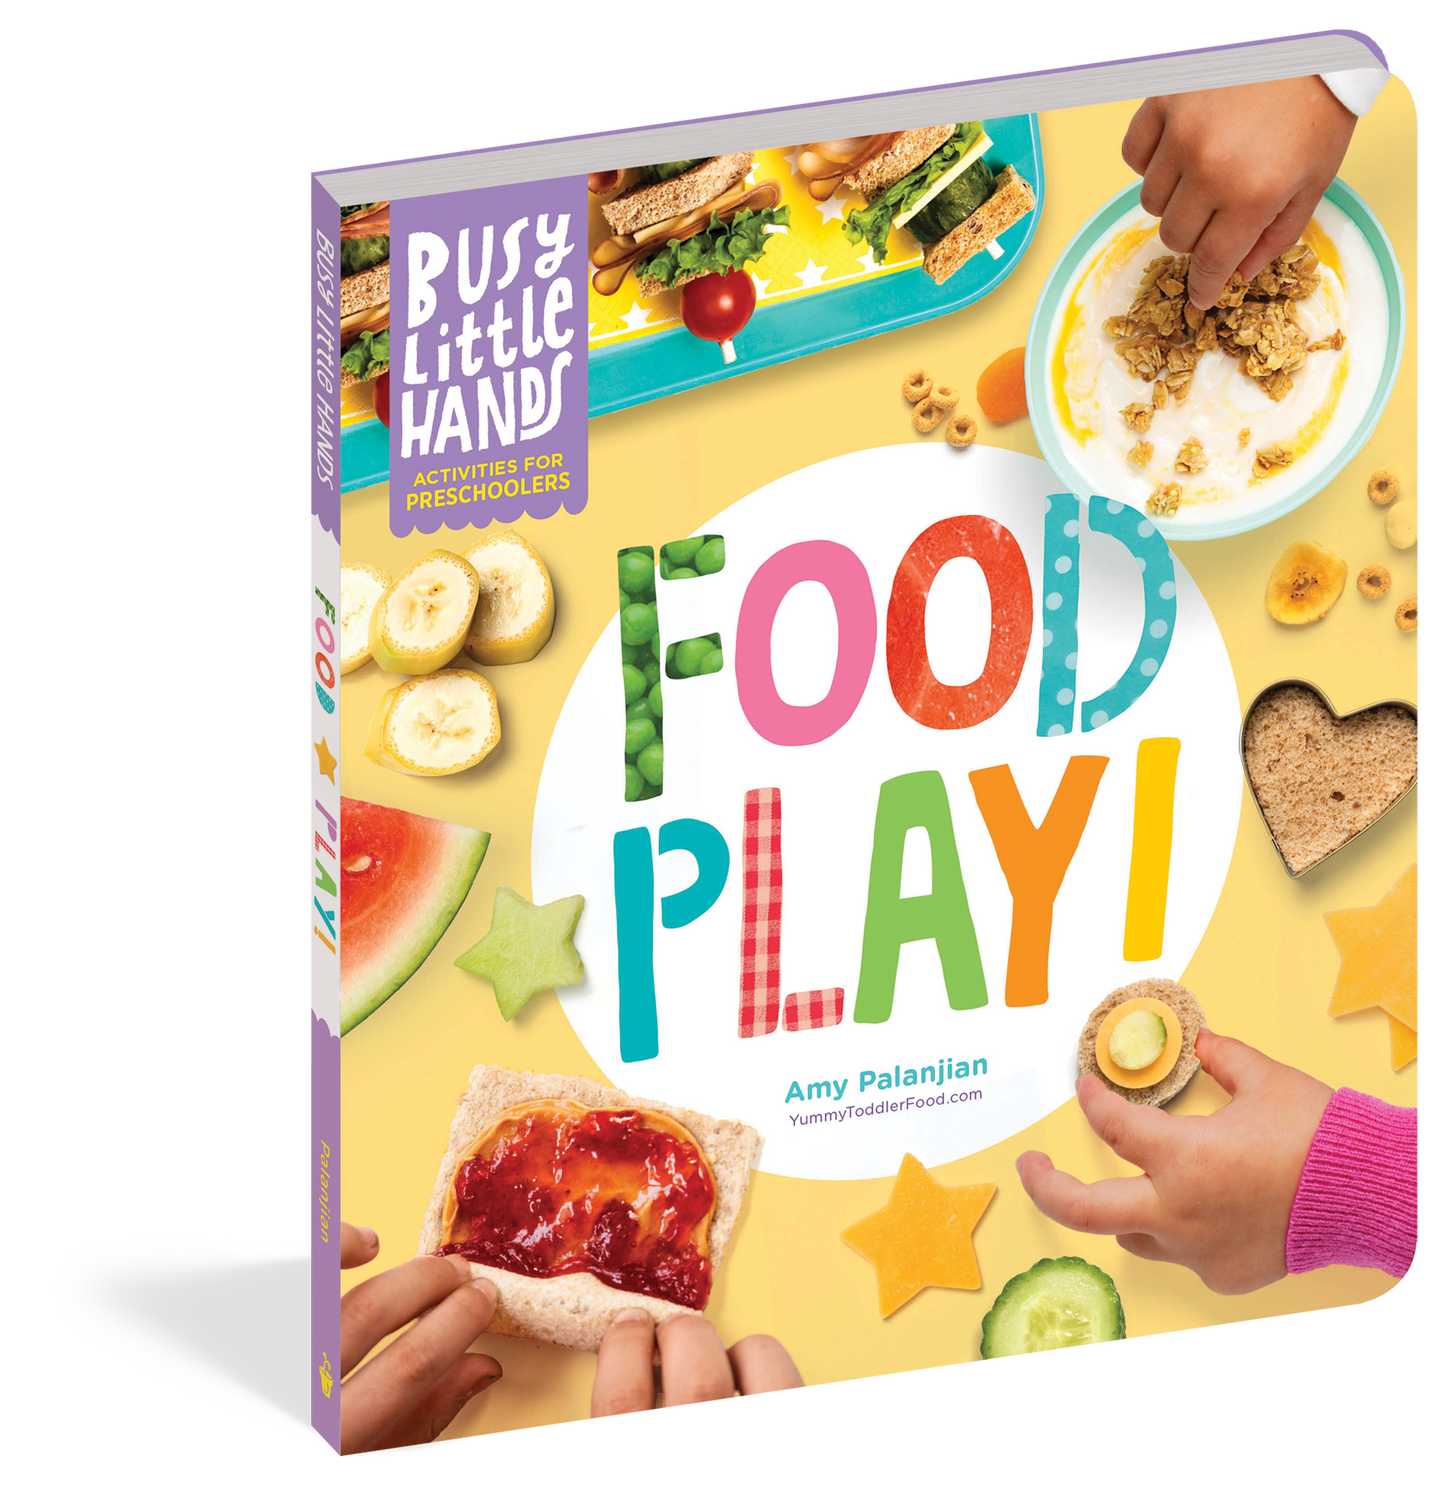 front cover of book has pictures of kids hands playing in their food, title, and author's name